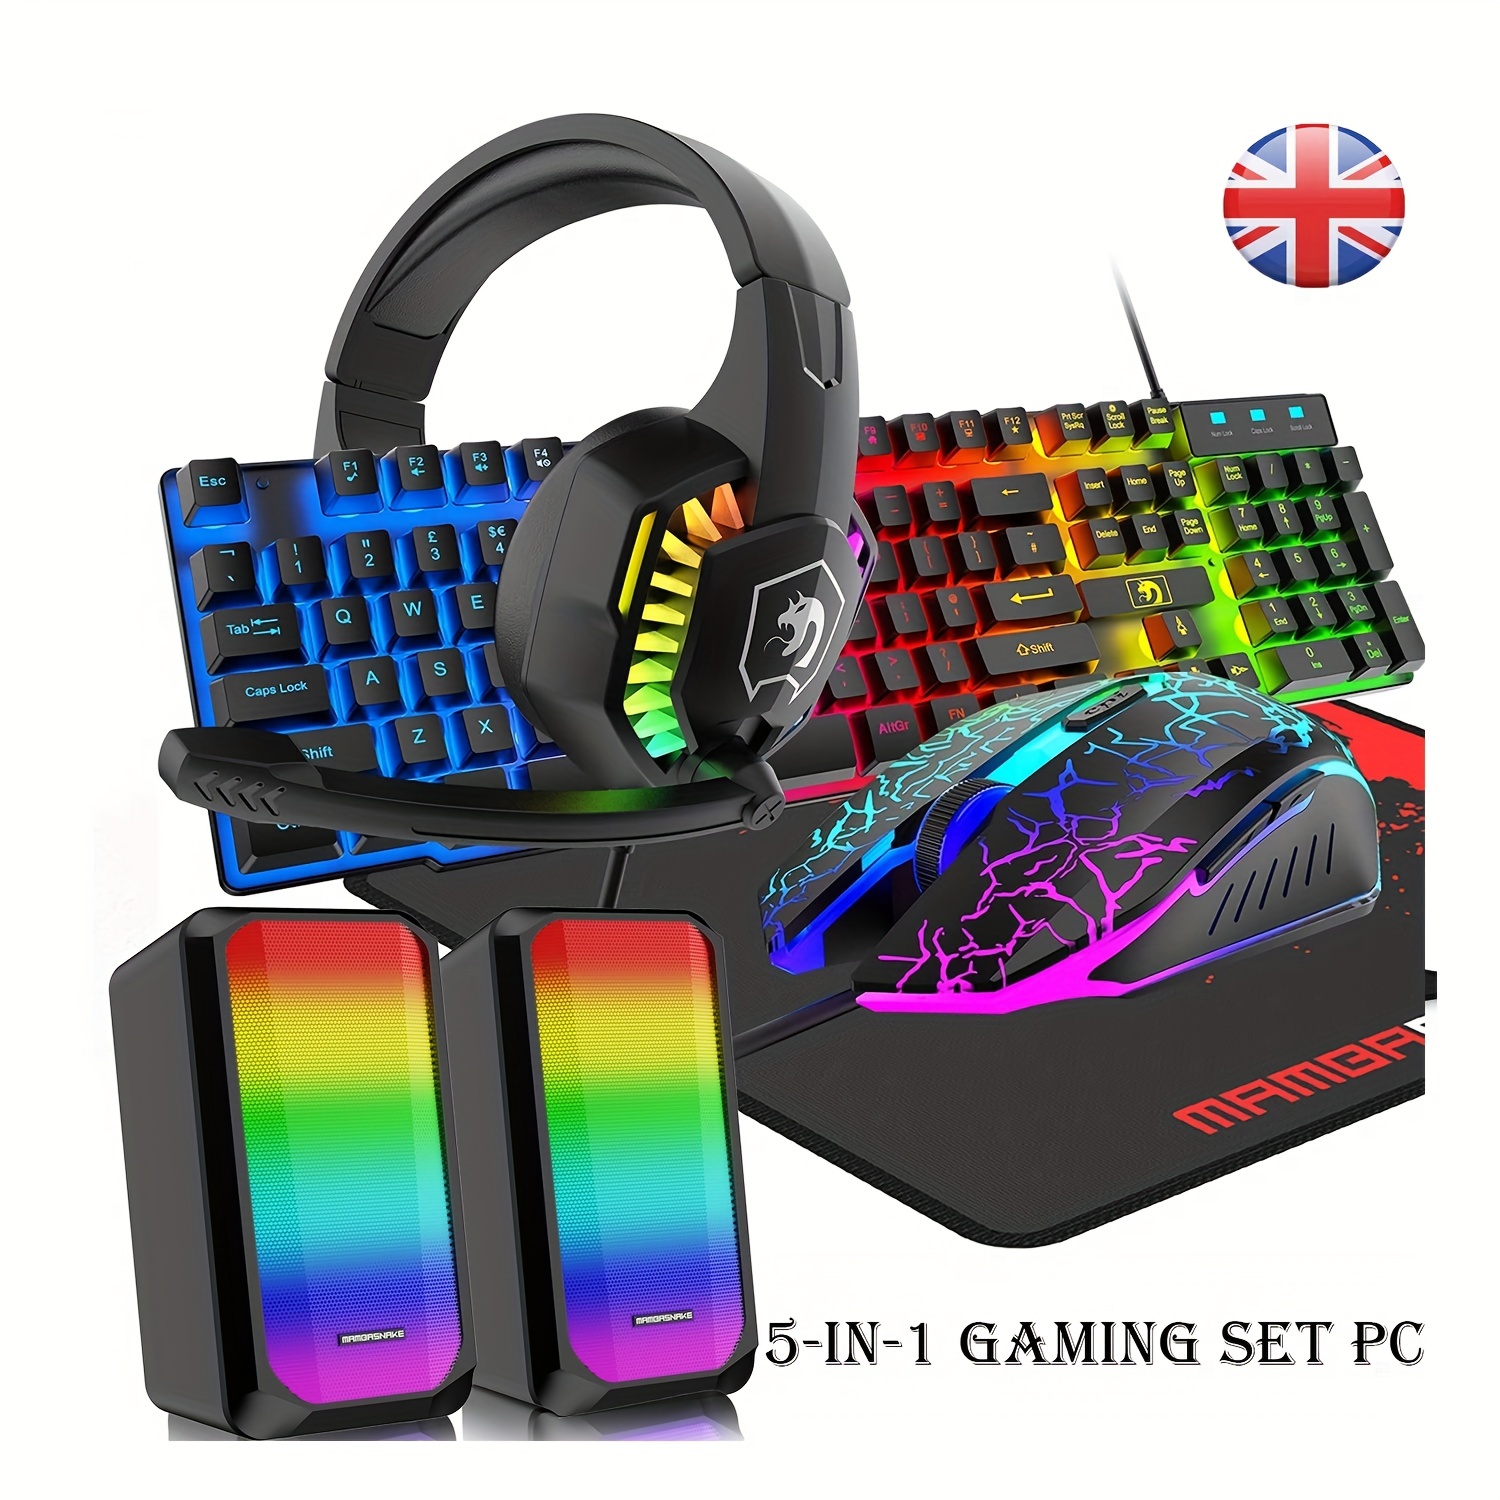 Pack Accessoires Gaming pour PC (Souris Metal Gamer 6 Boutons +